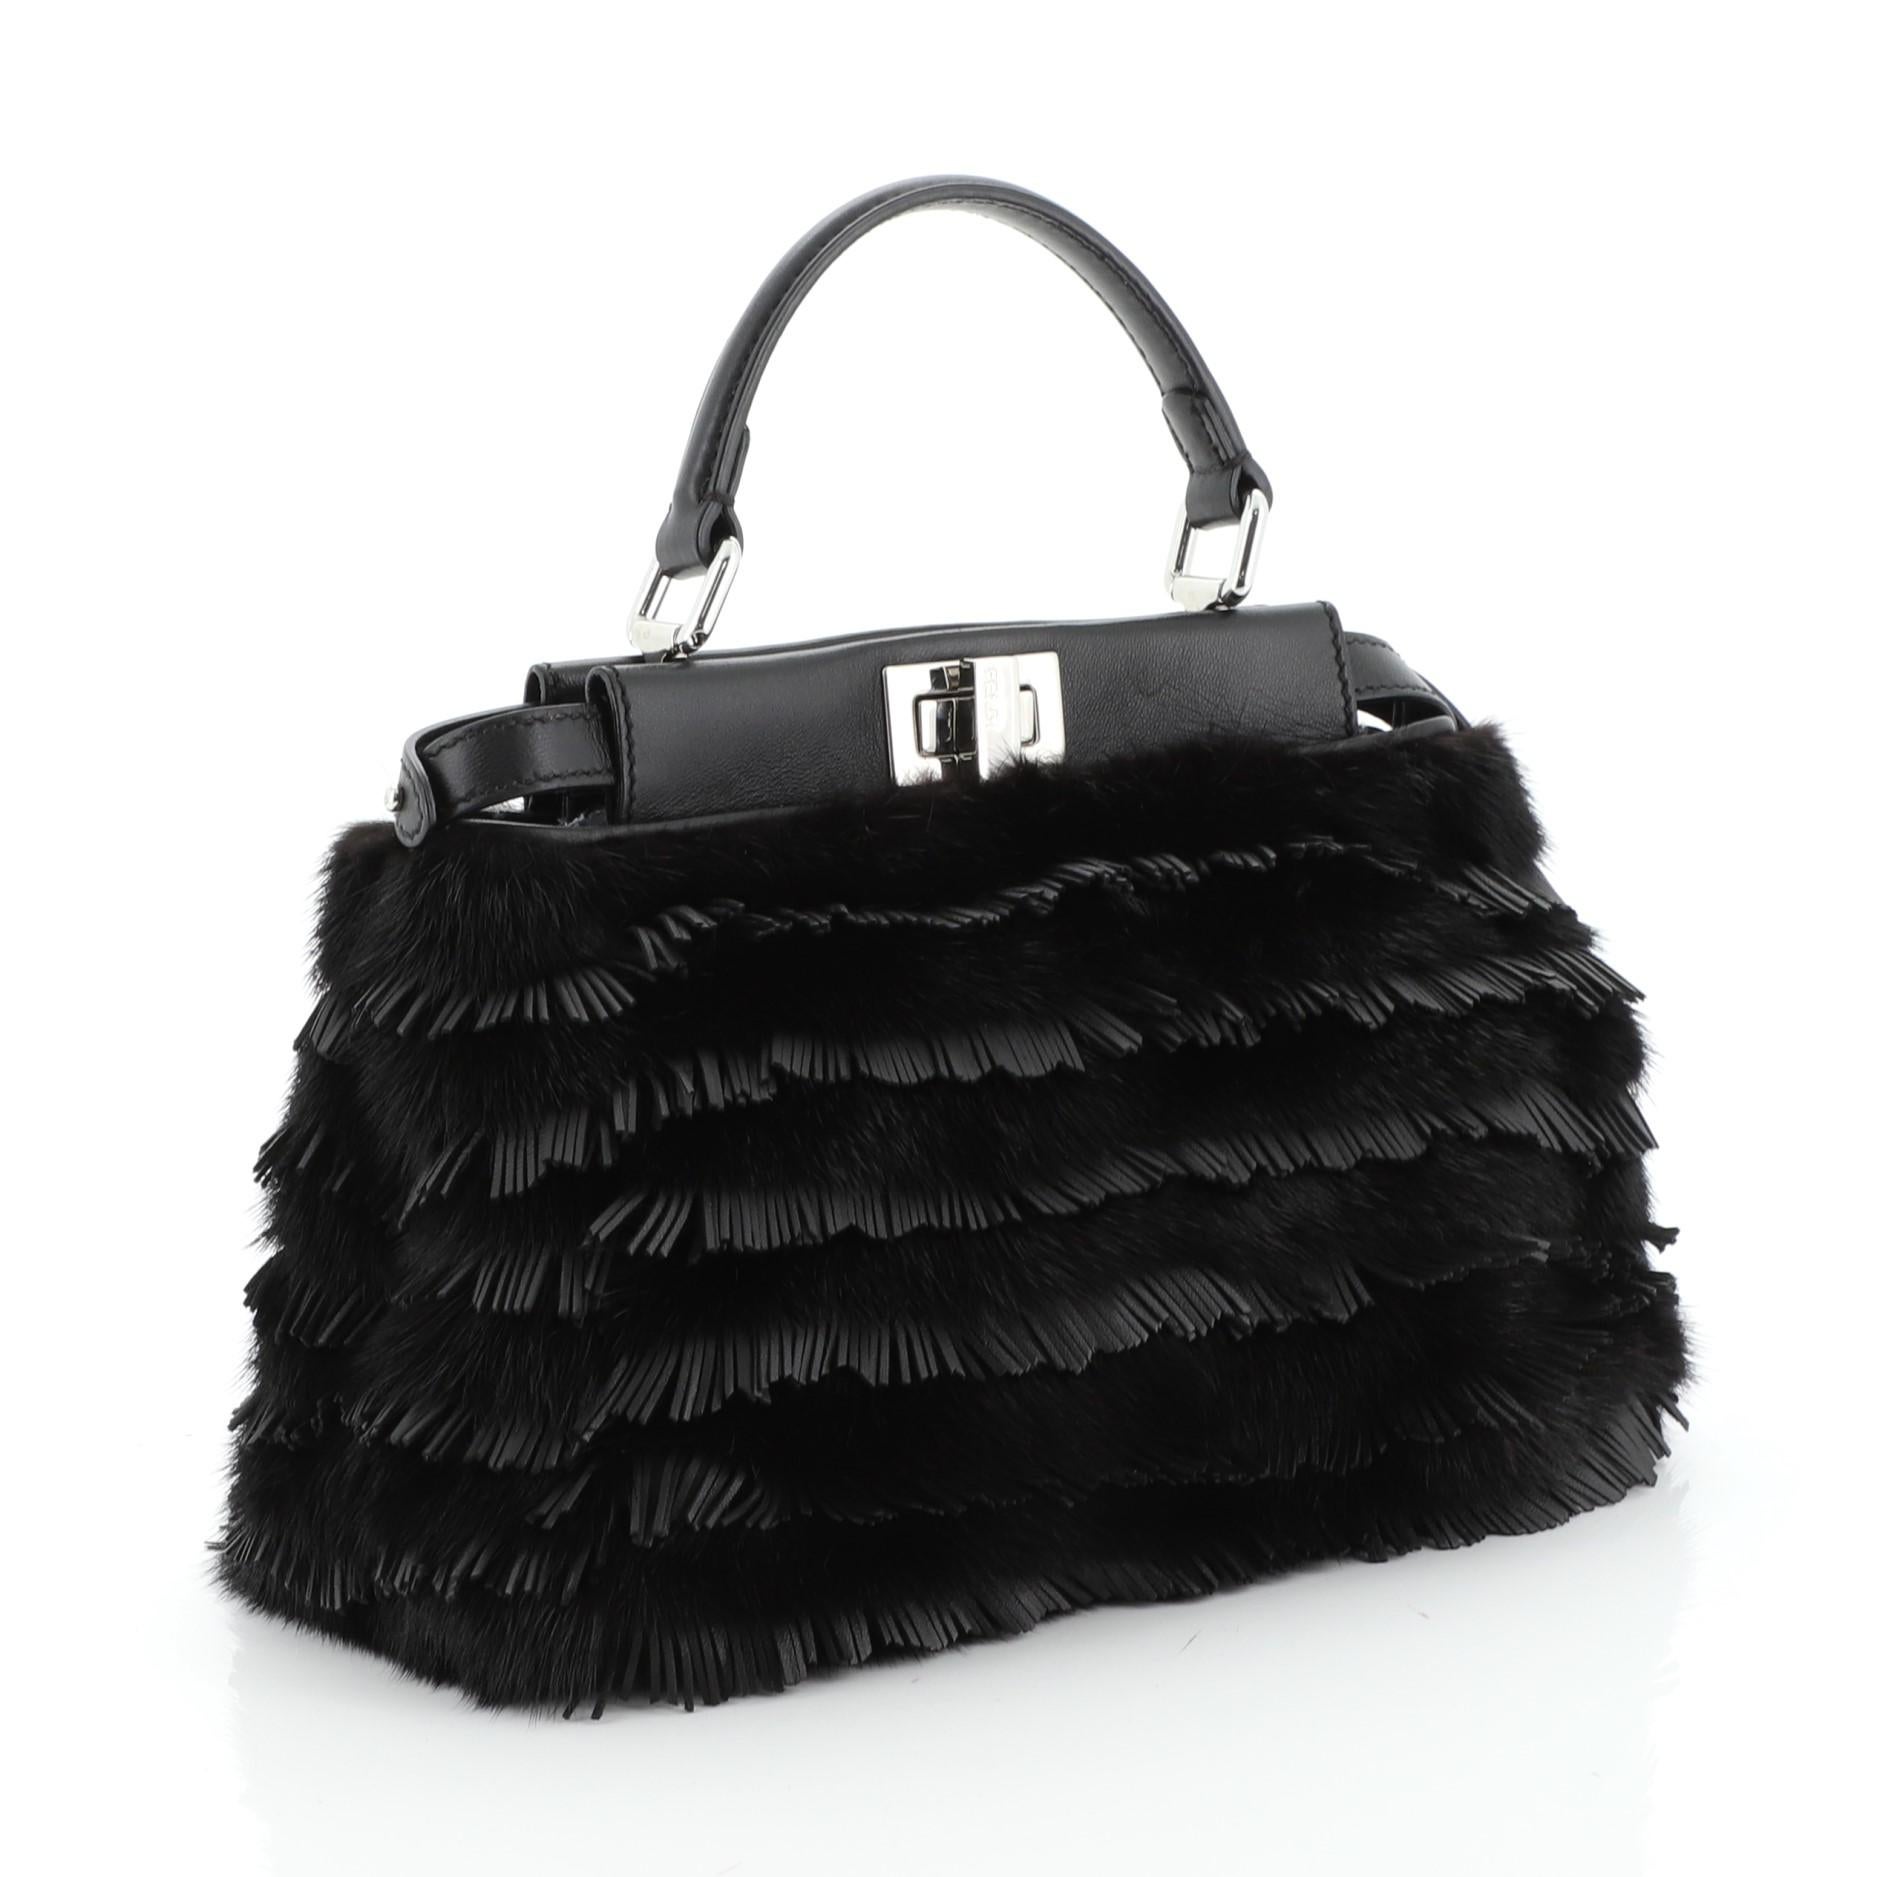 This Fendi Peekaboo Bag Fringe Leather Mini, crafted from black fringe leather, features short leather top handle, protective base studs, and silver-tone hardware. Its two compartments with turn-lock and zip closures open to a black leather interior